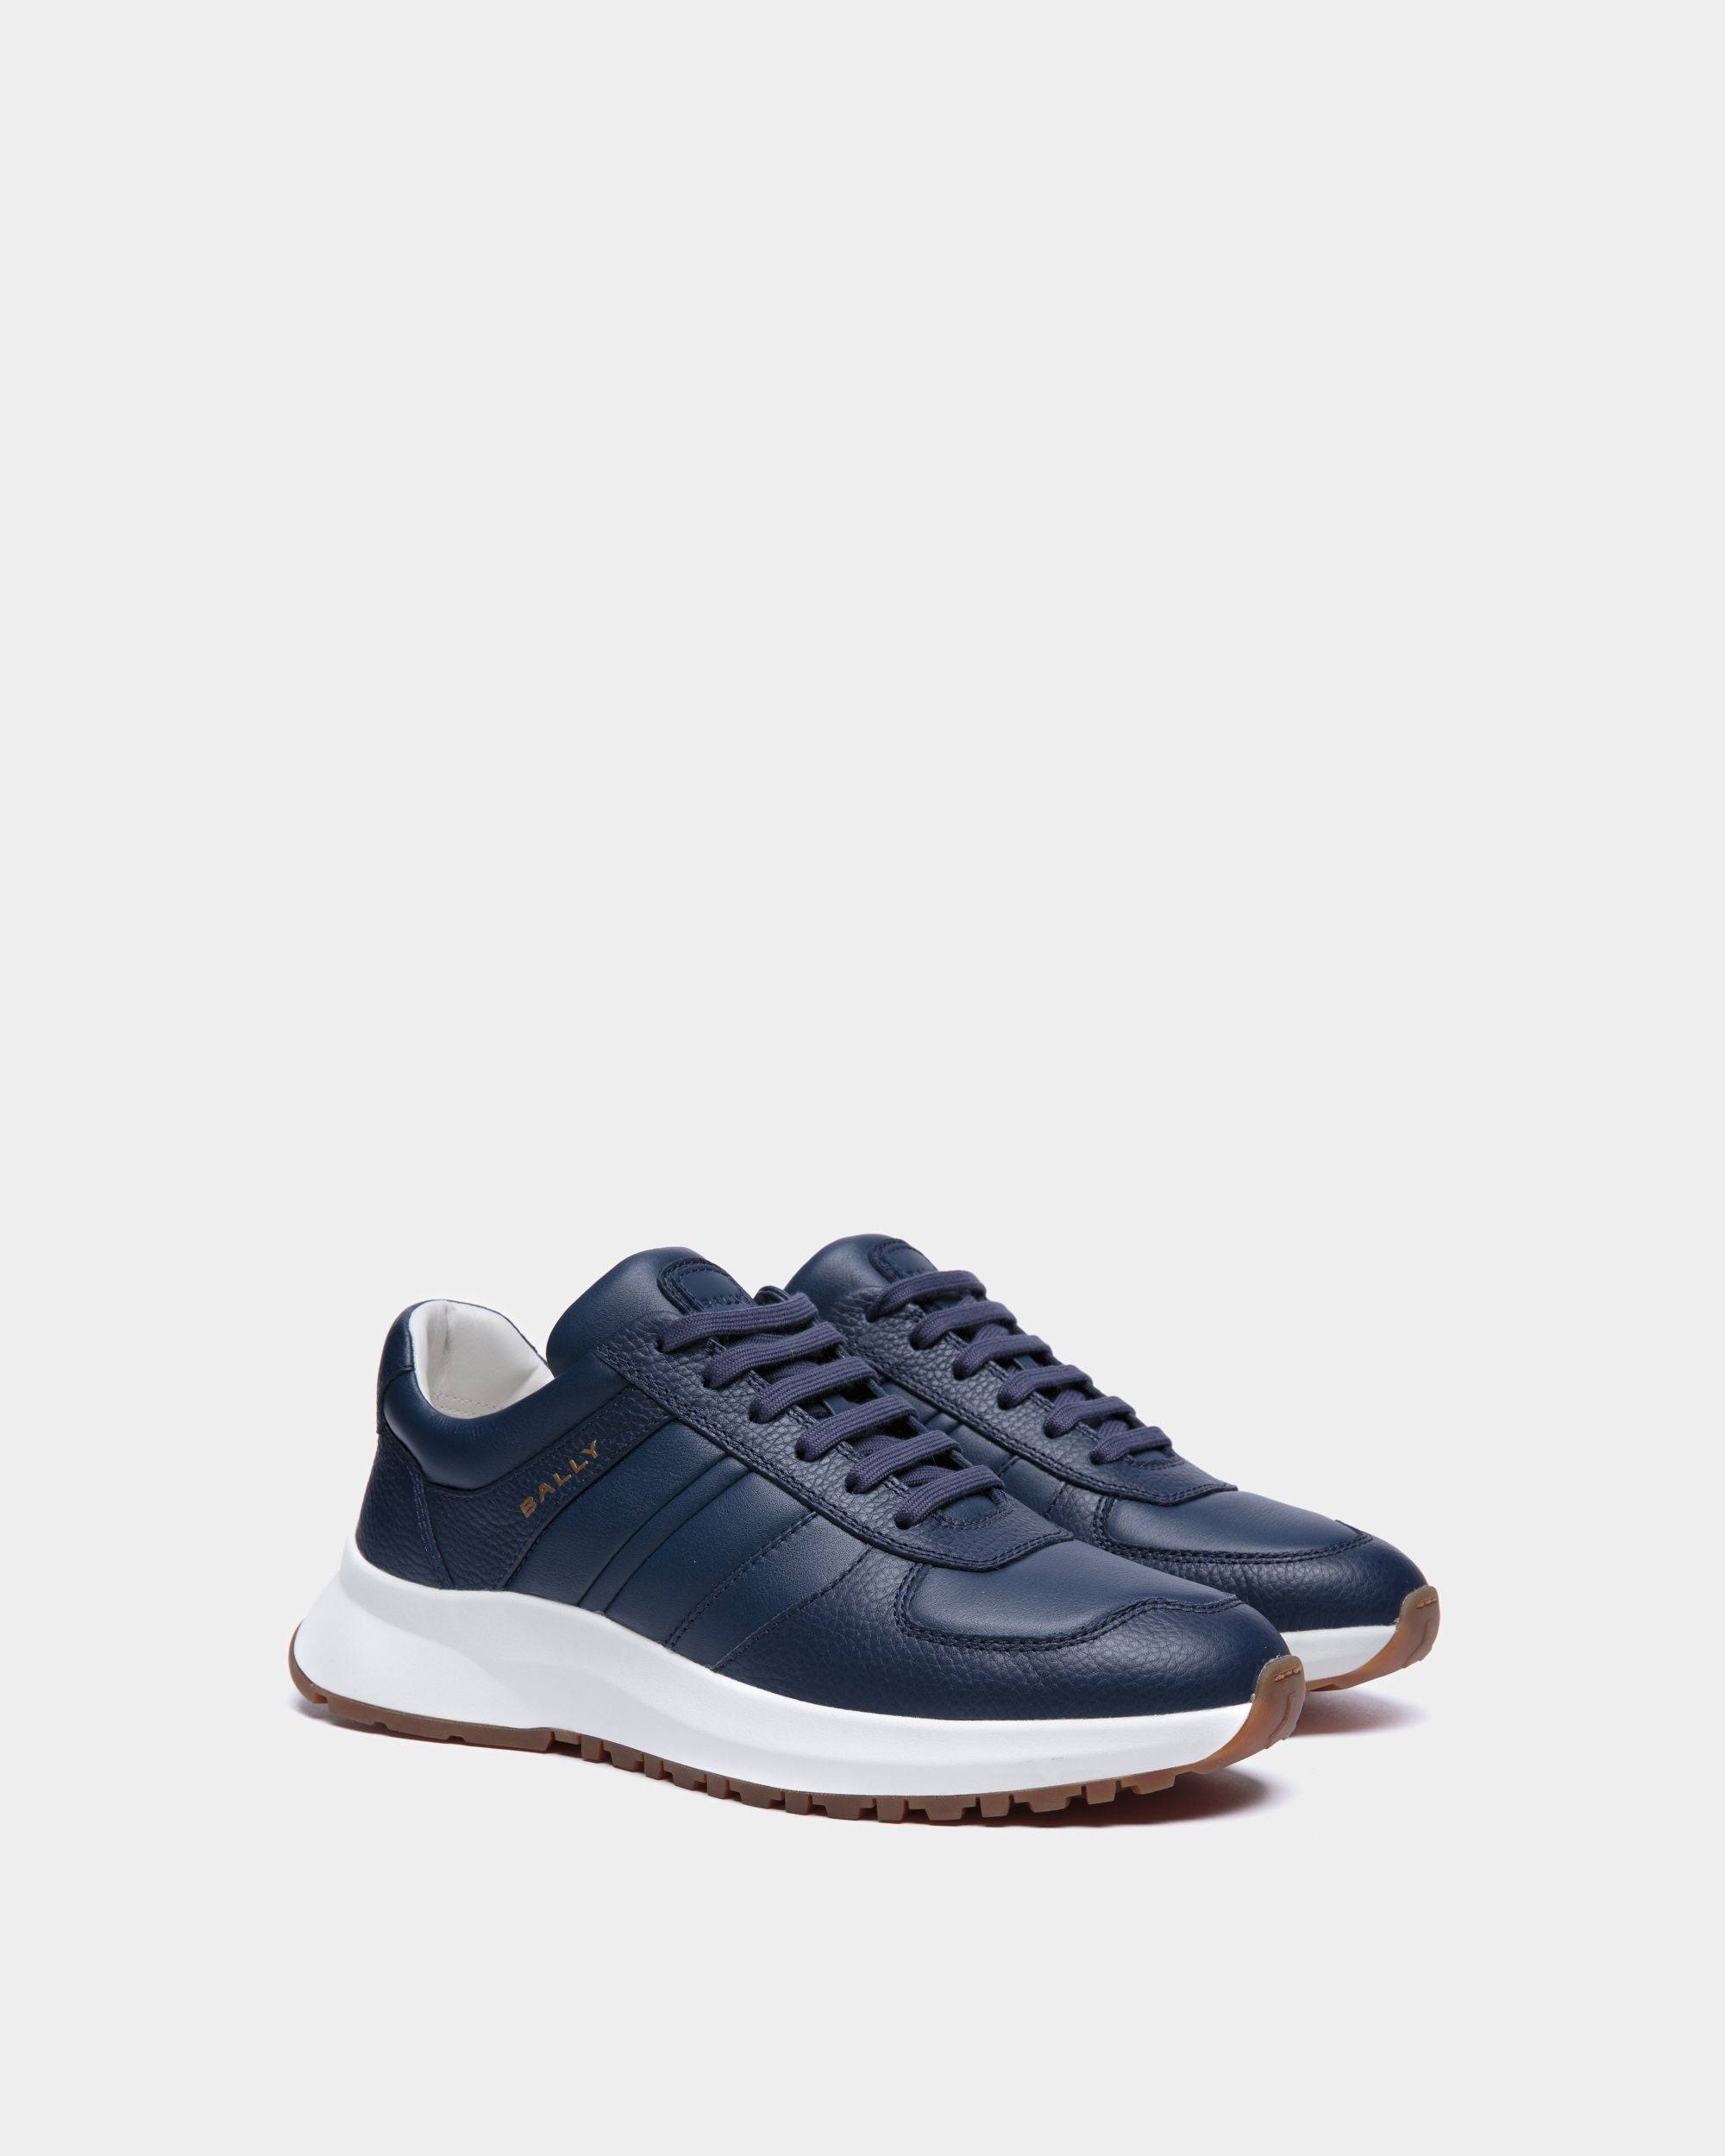 Outline | Men's Sneaker in Blue Grained Leather | Bally | Still Life 3/4 Front